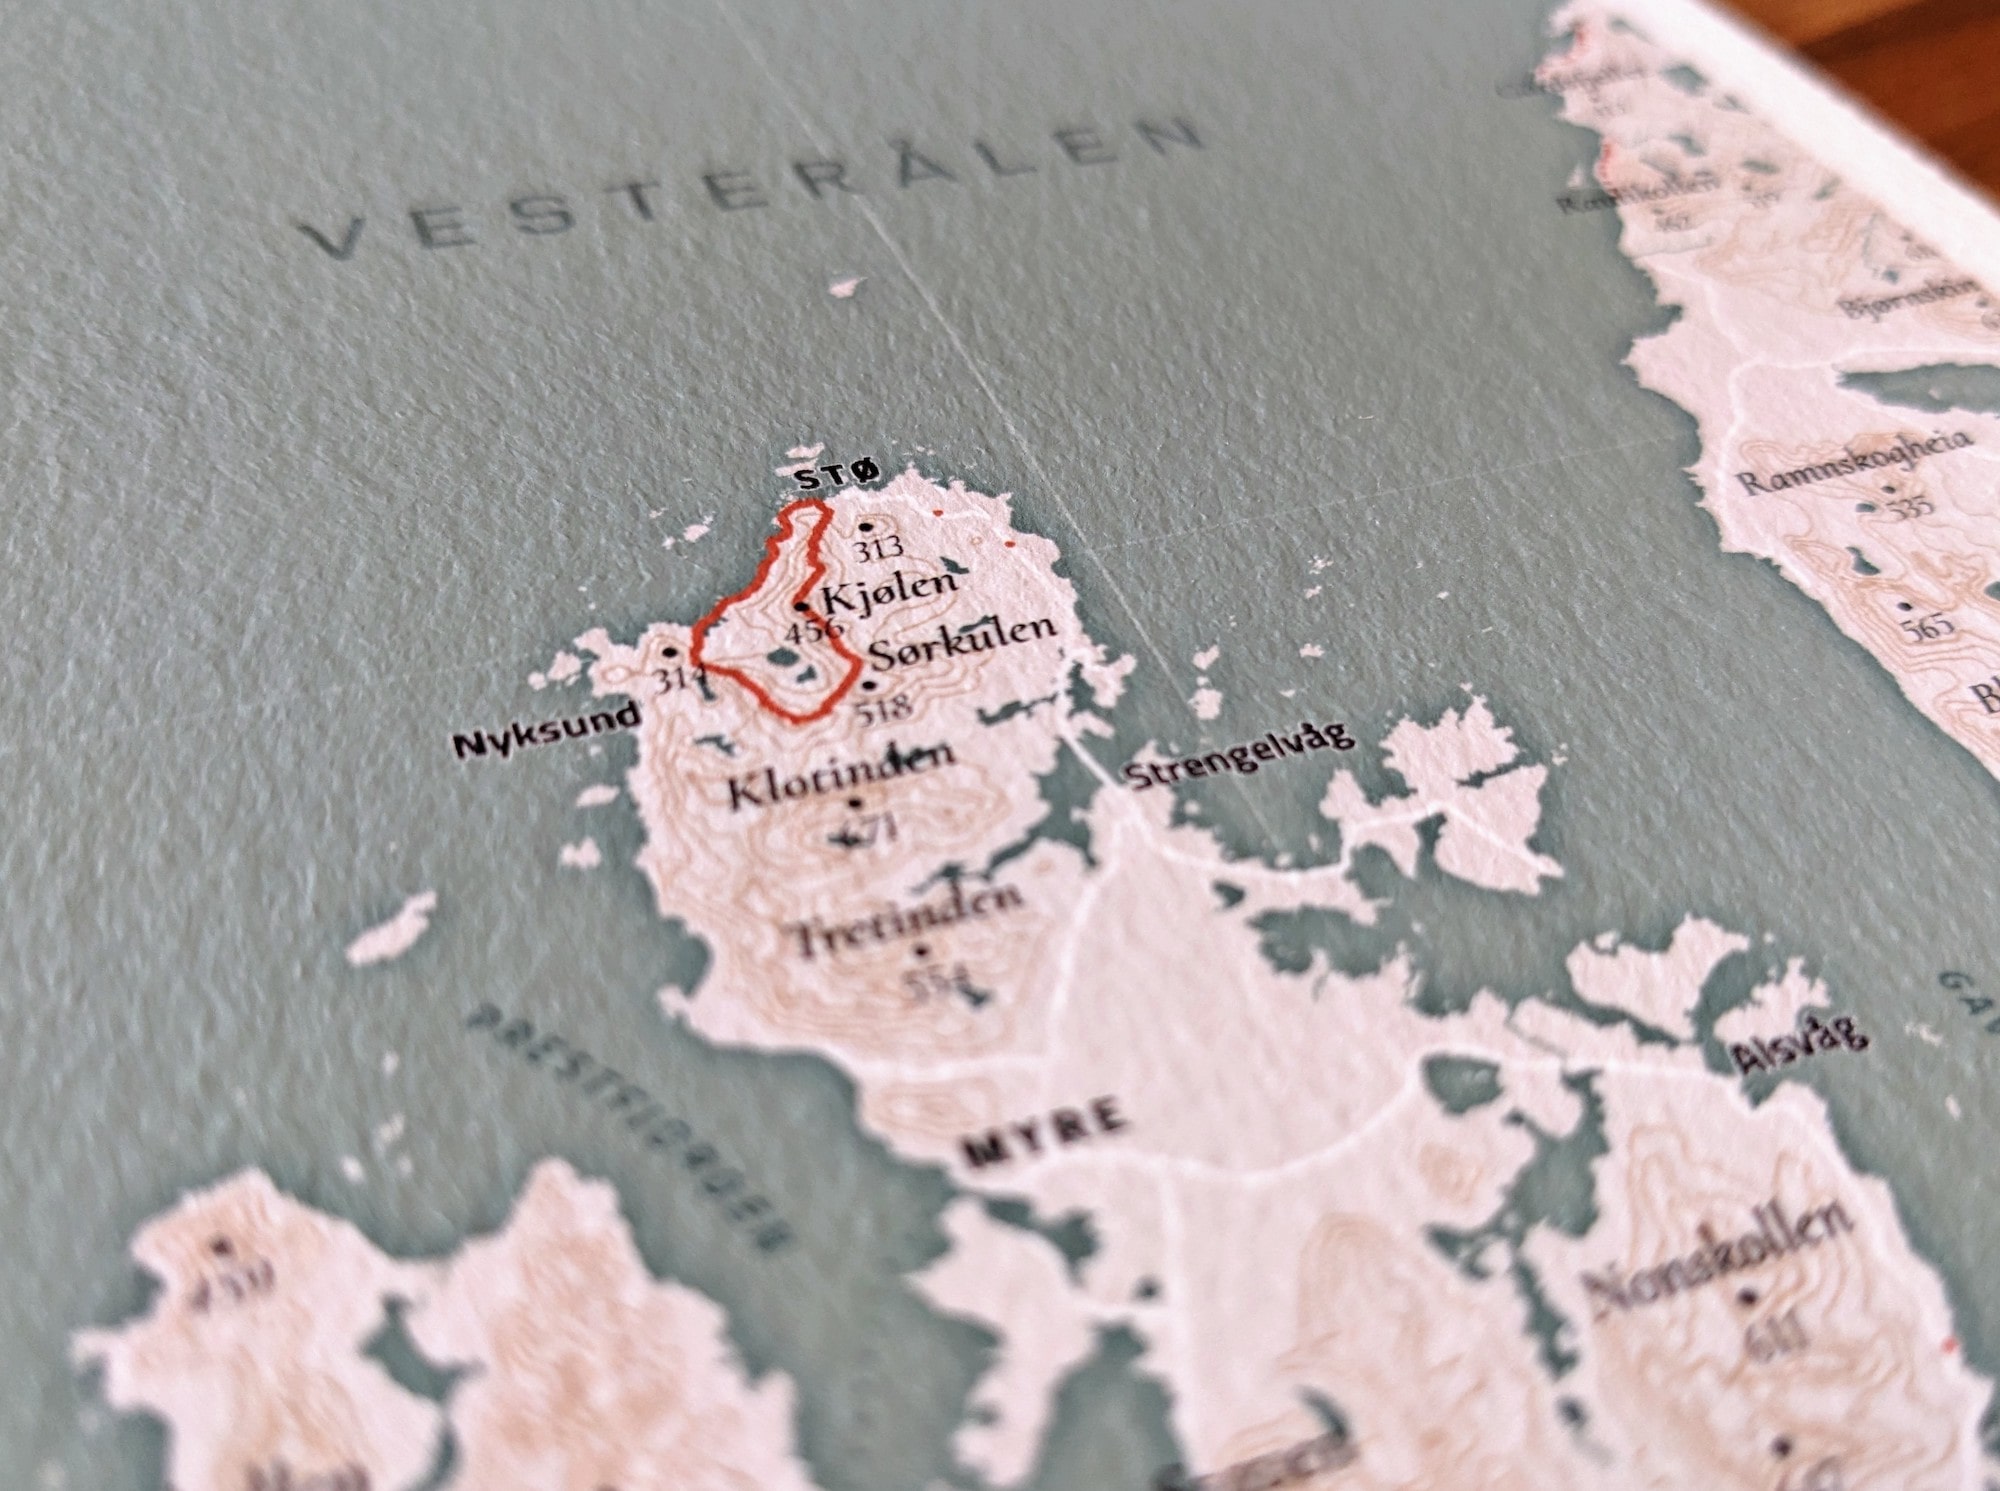 A close-up photo of the printed map focusing on the Dronningruta